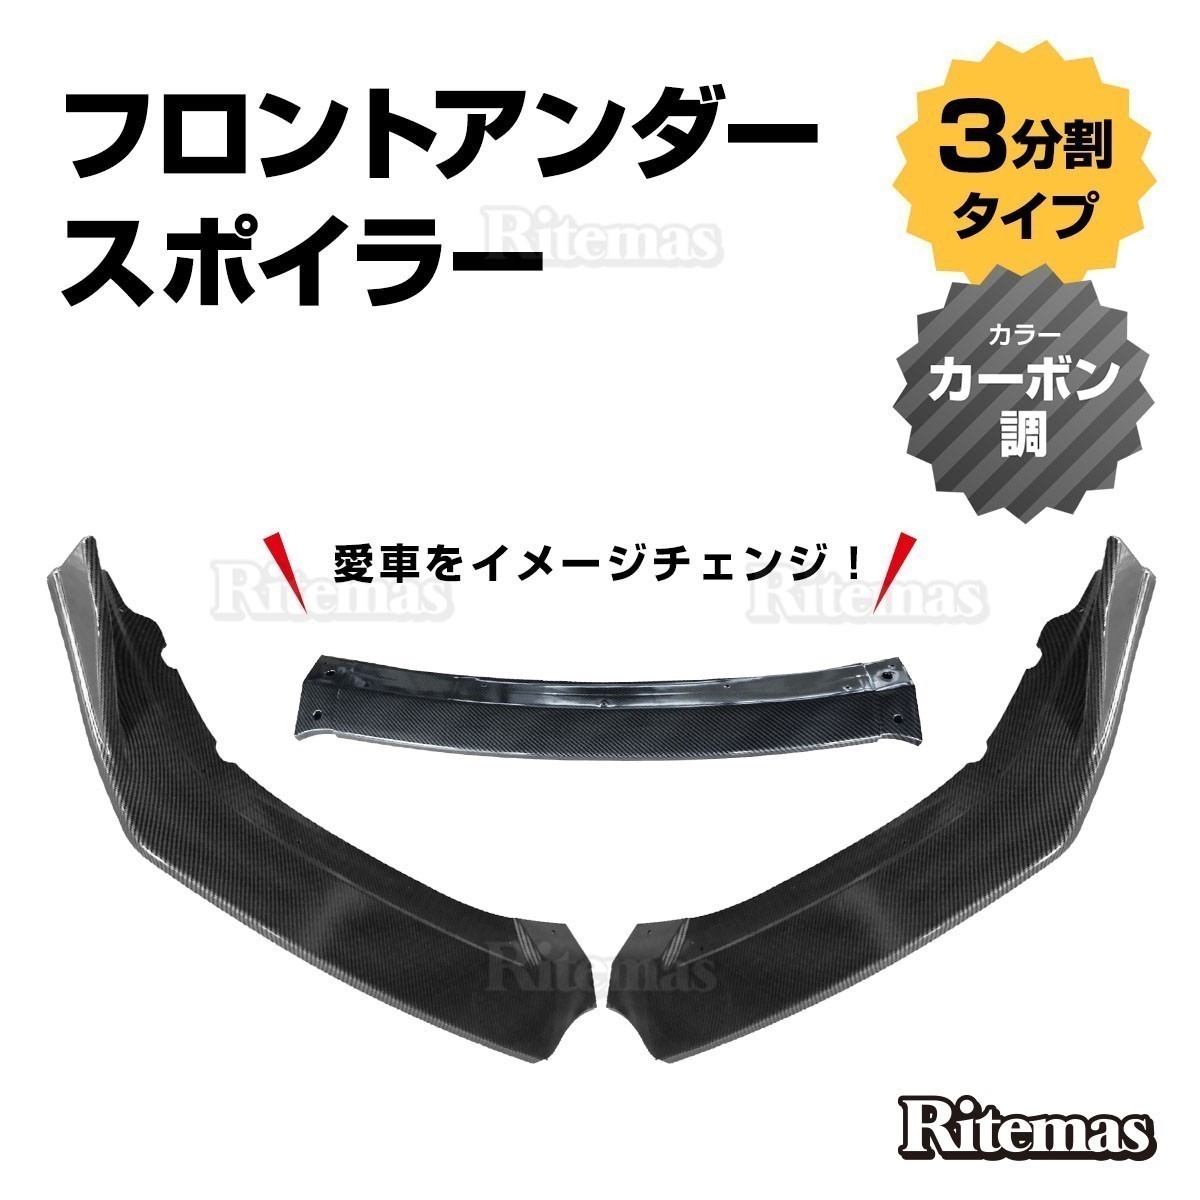  division type under Canard front lip spoiler all-purpose carbon pattern ABS made 3 division type aero front bumper FLS-001-C